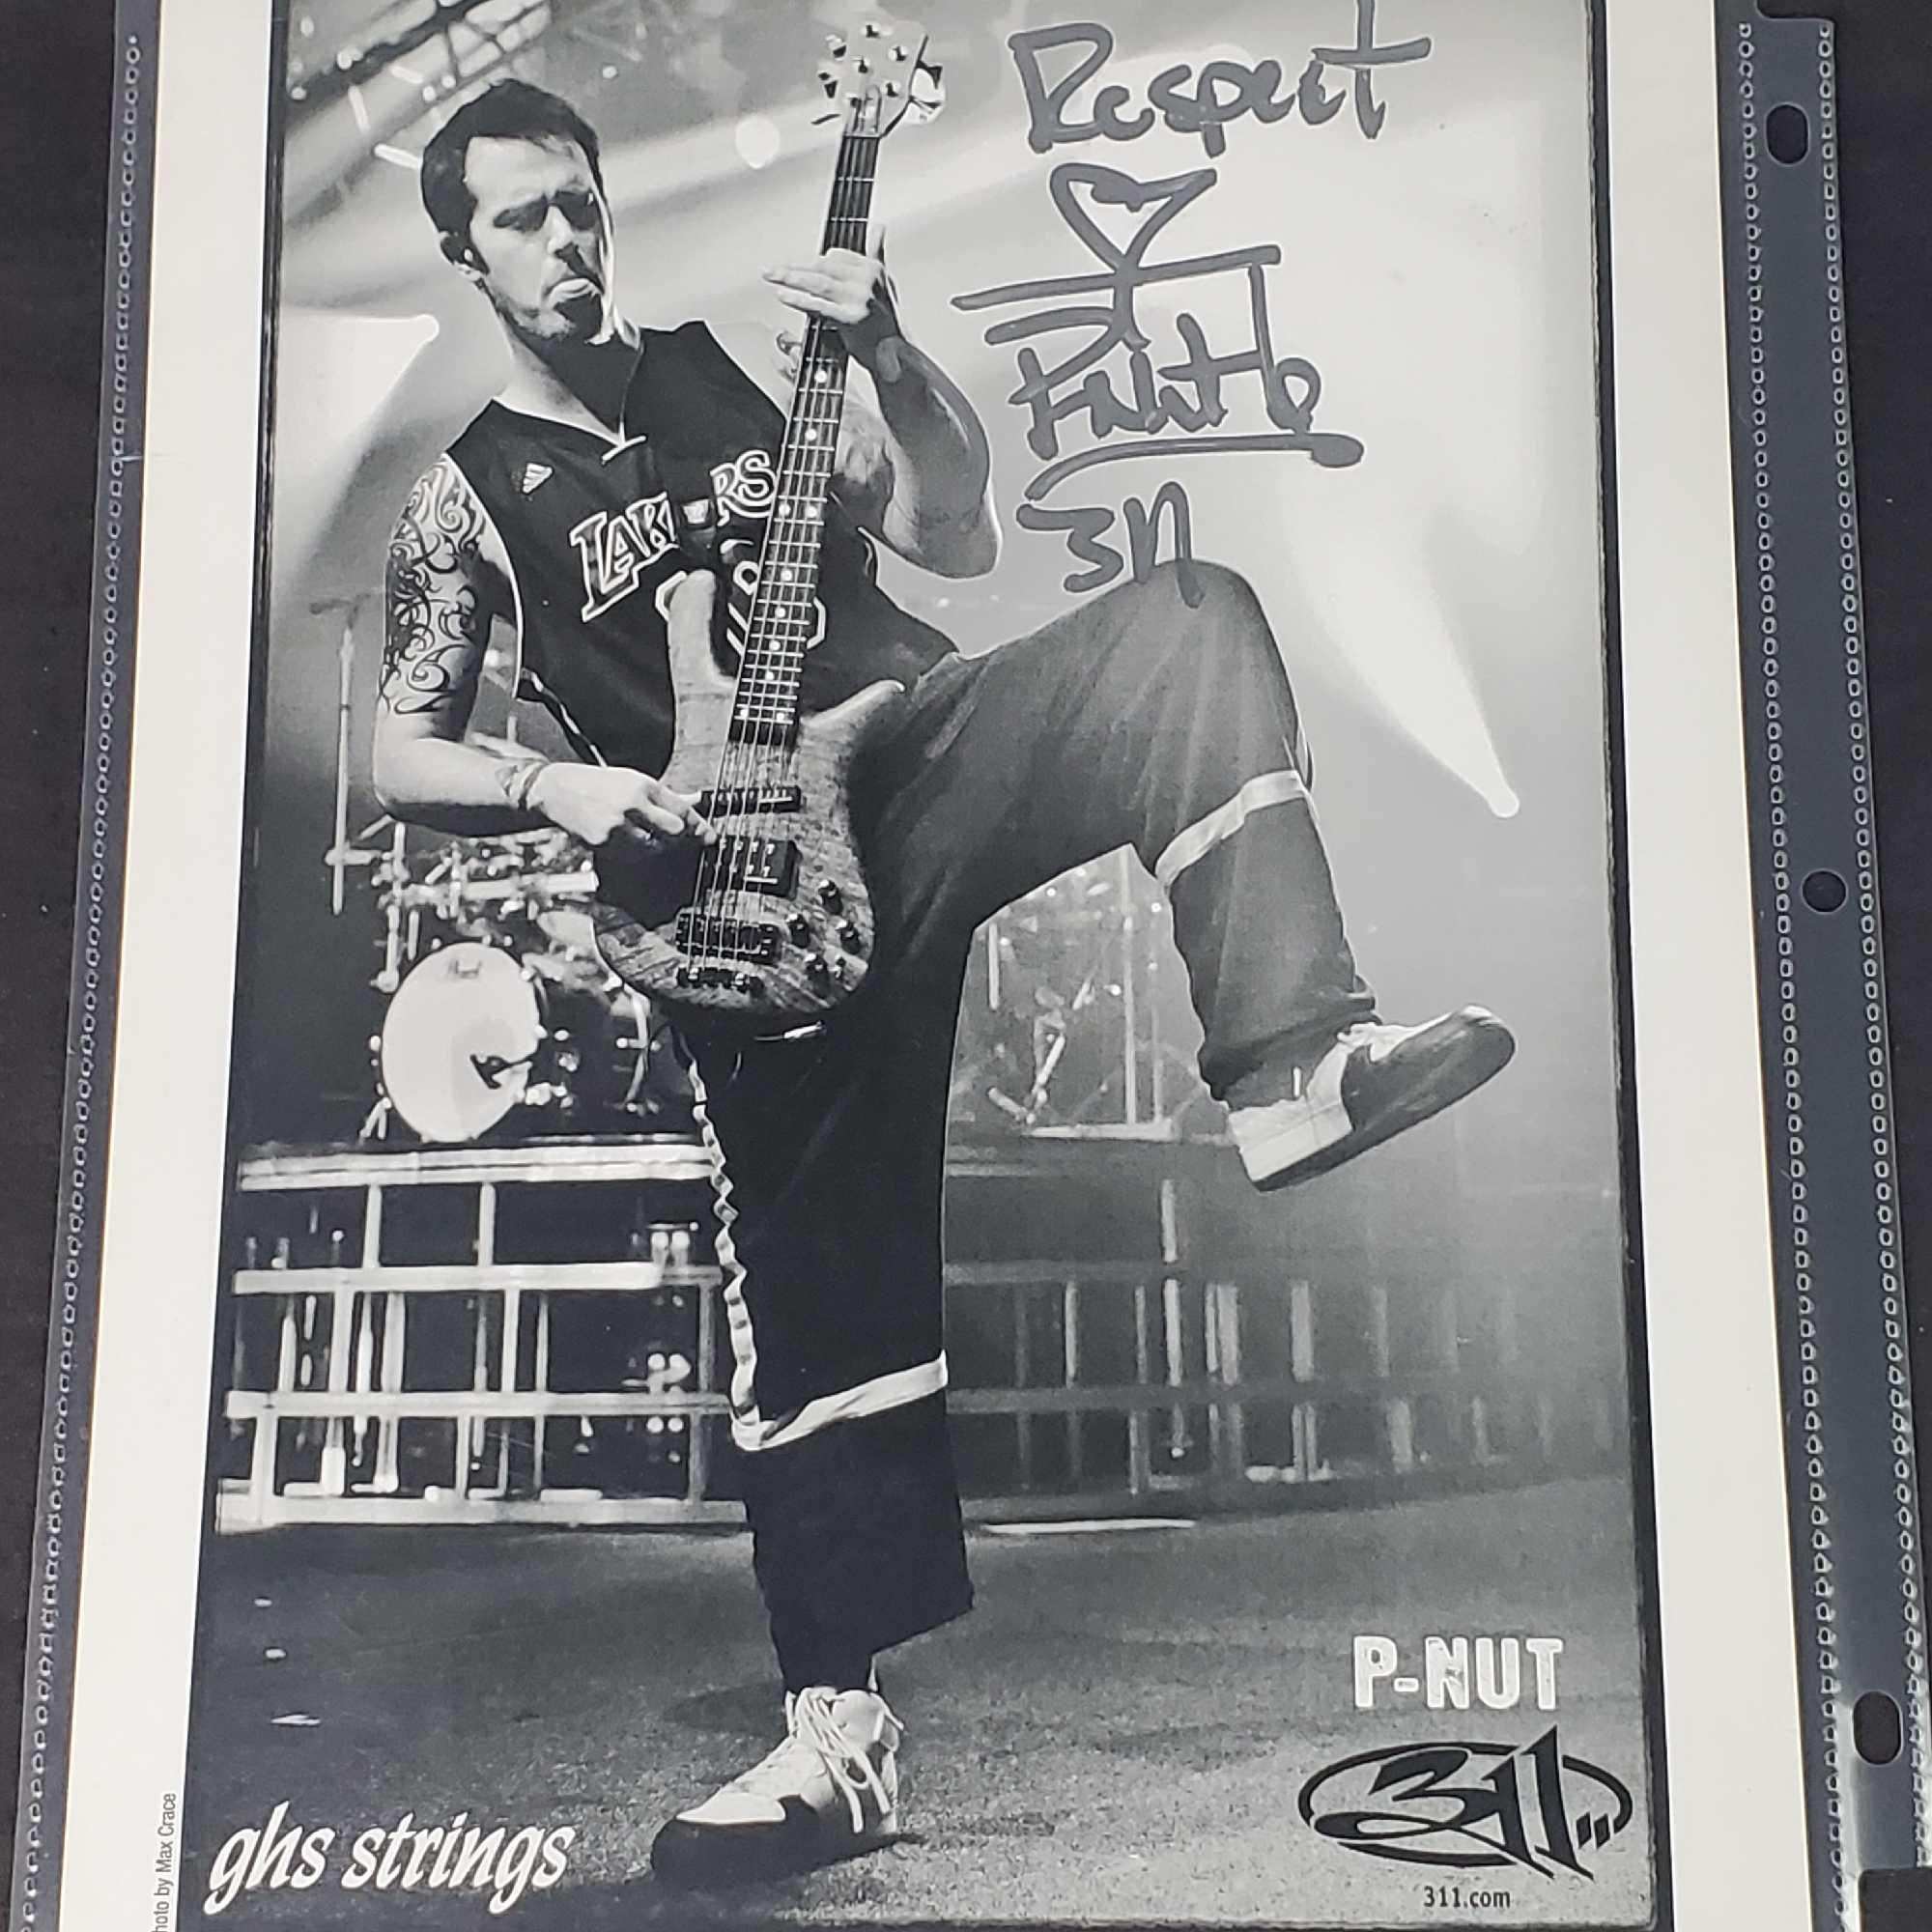 Black and white photograph of 311 guitar player P-Nut with signature